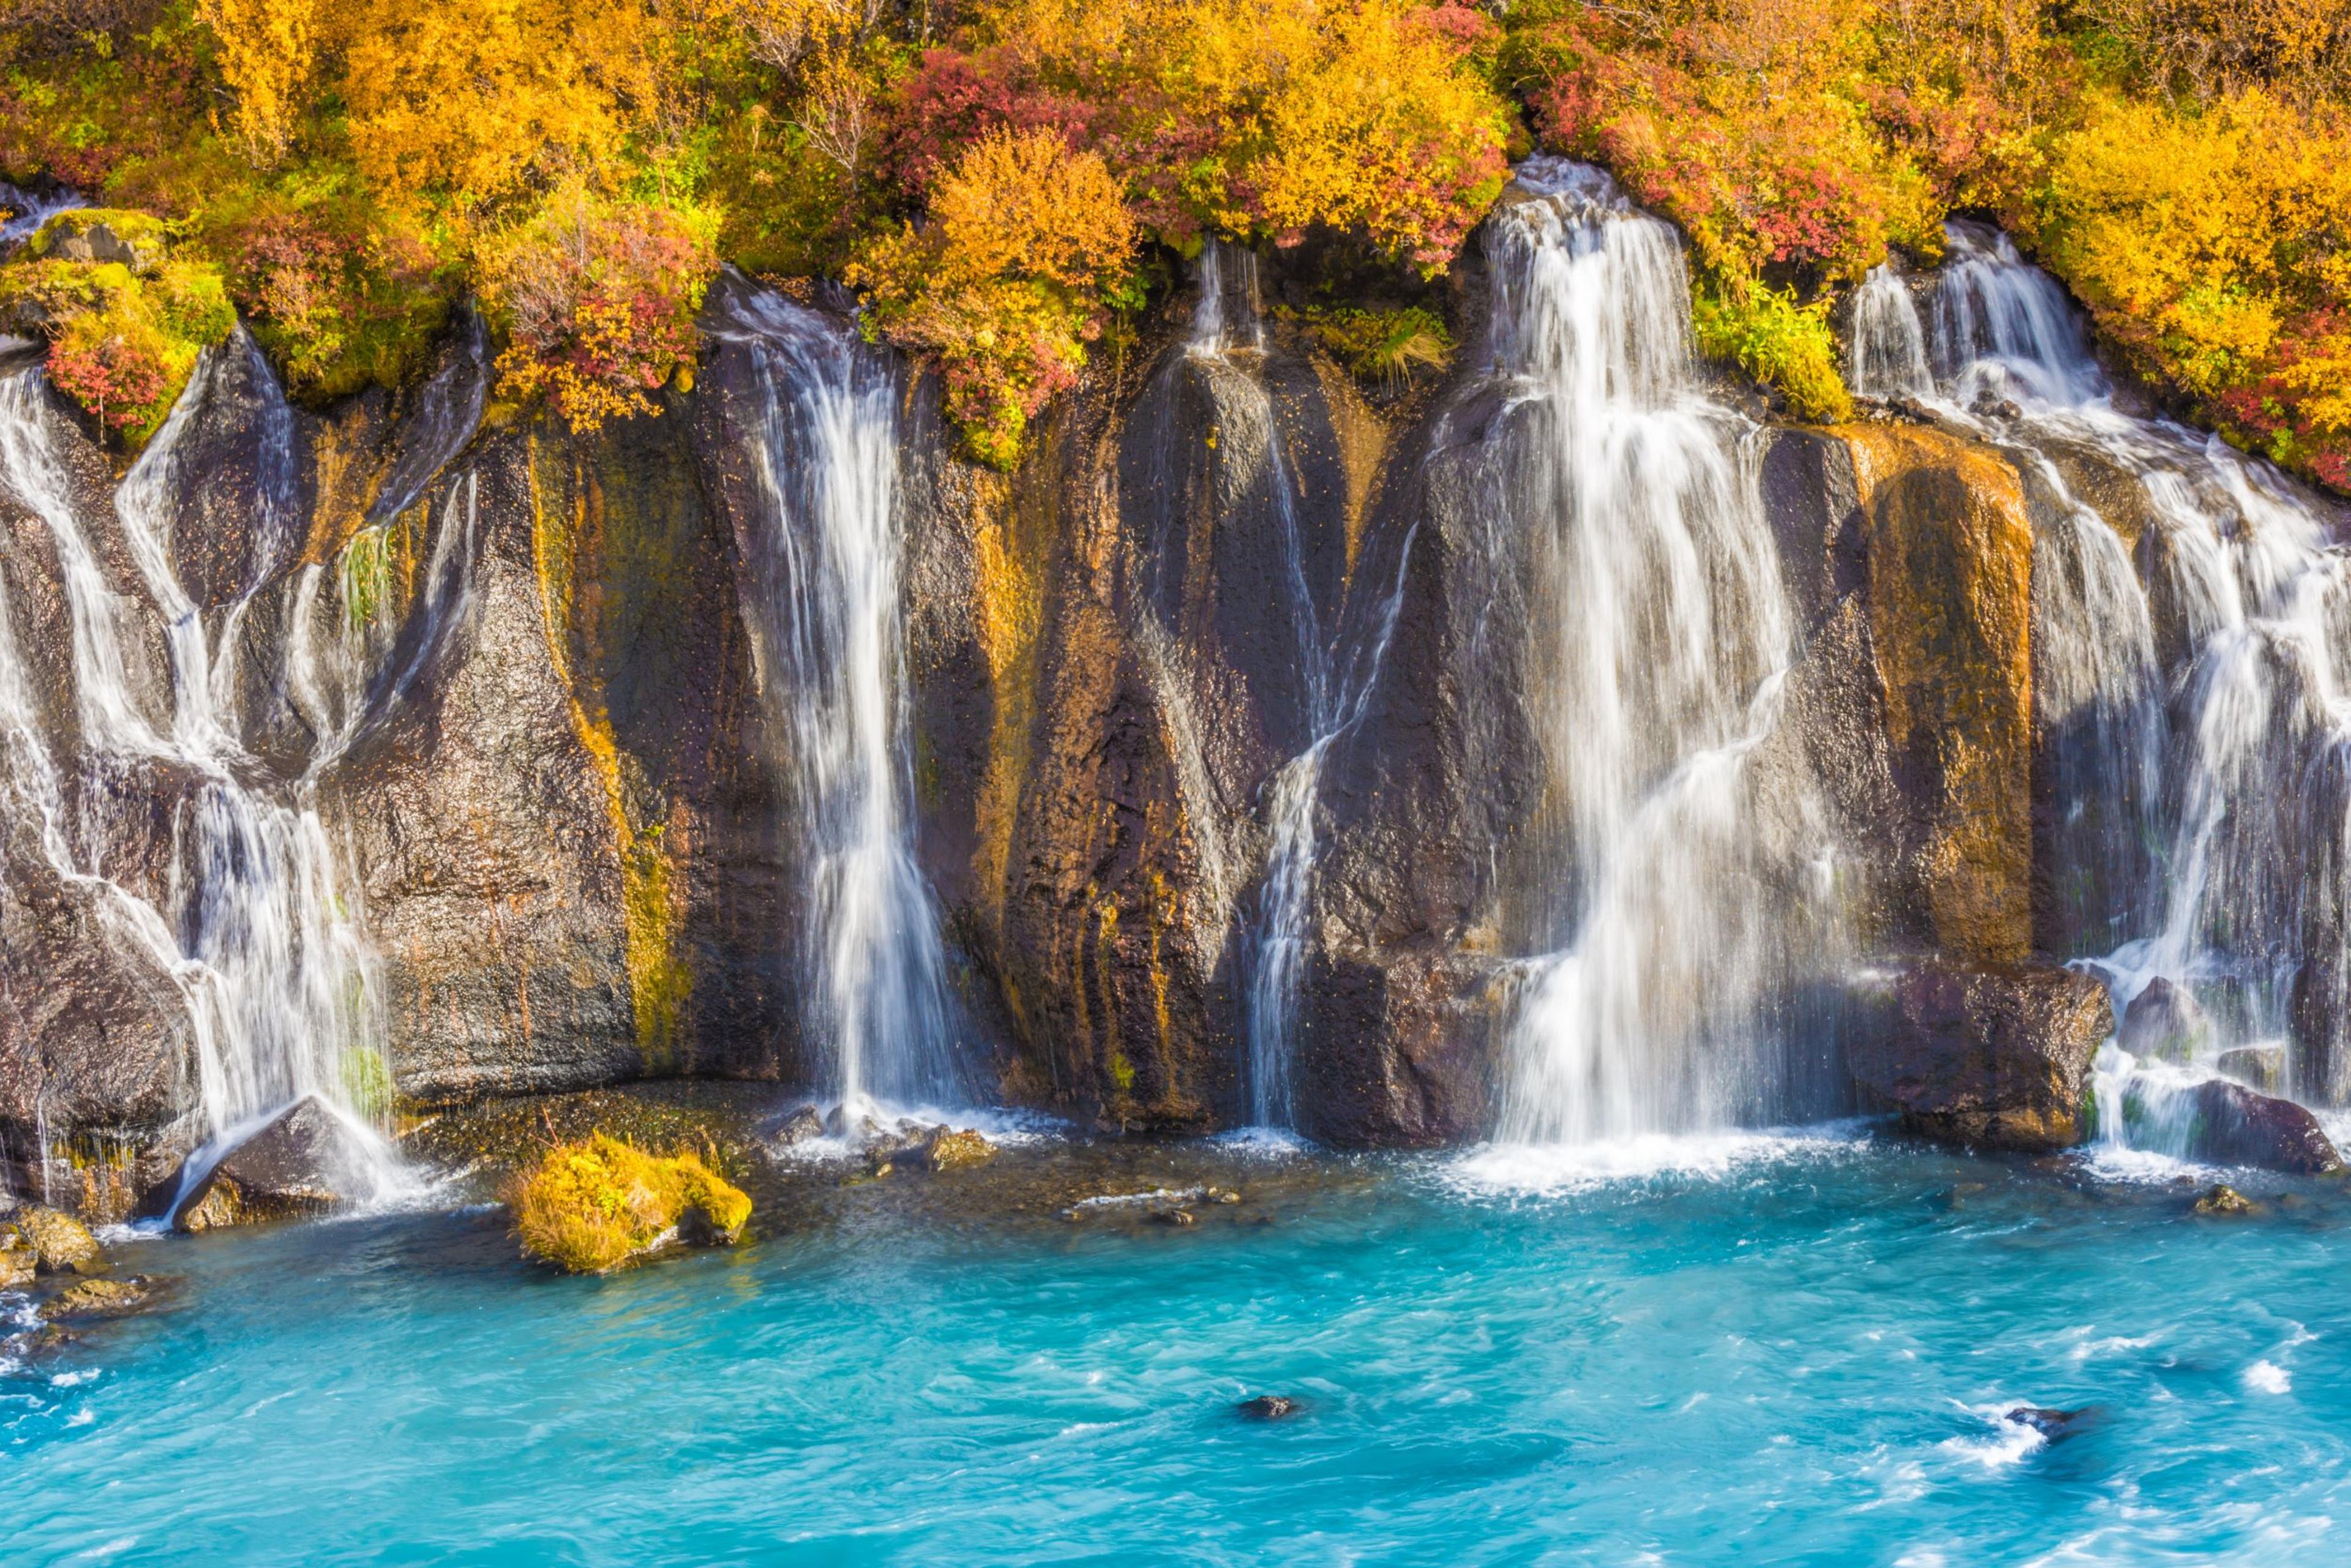 Hraunfossar Waterfalls. Delicate Cascades Flowing from Lava Fields into Crystal Waters